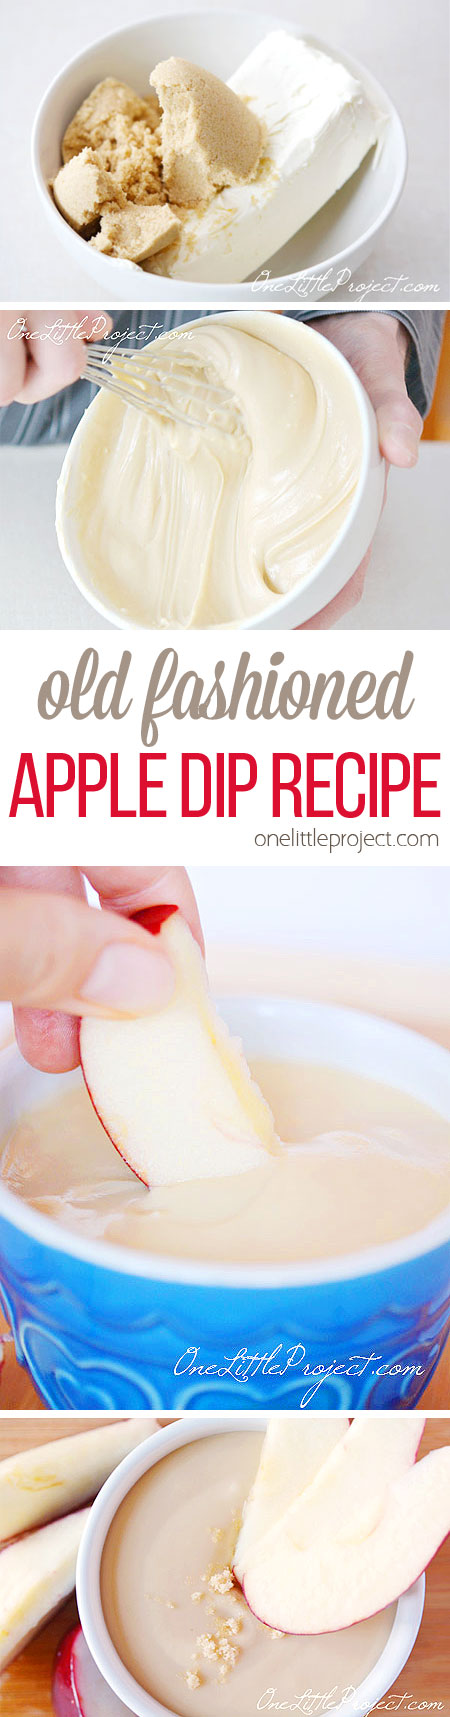 This old fashioned apple dip is SO GOOD! Only three ingredients and it tastes just like I remember from when I was a kid! YUM!